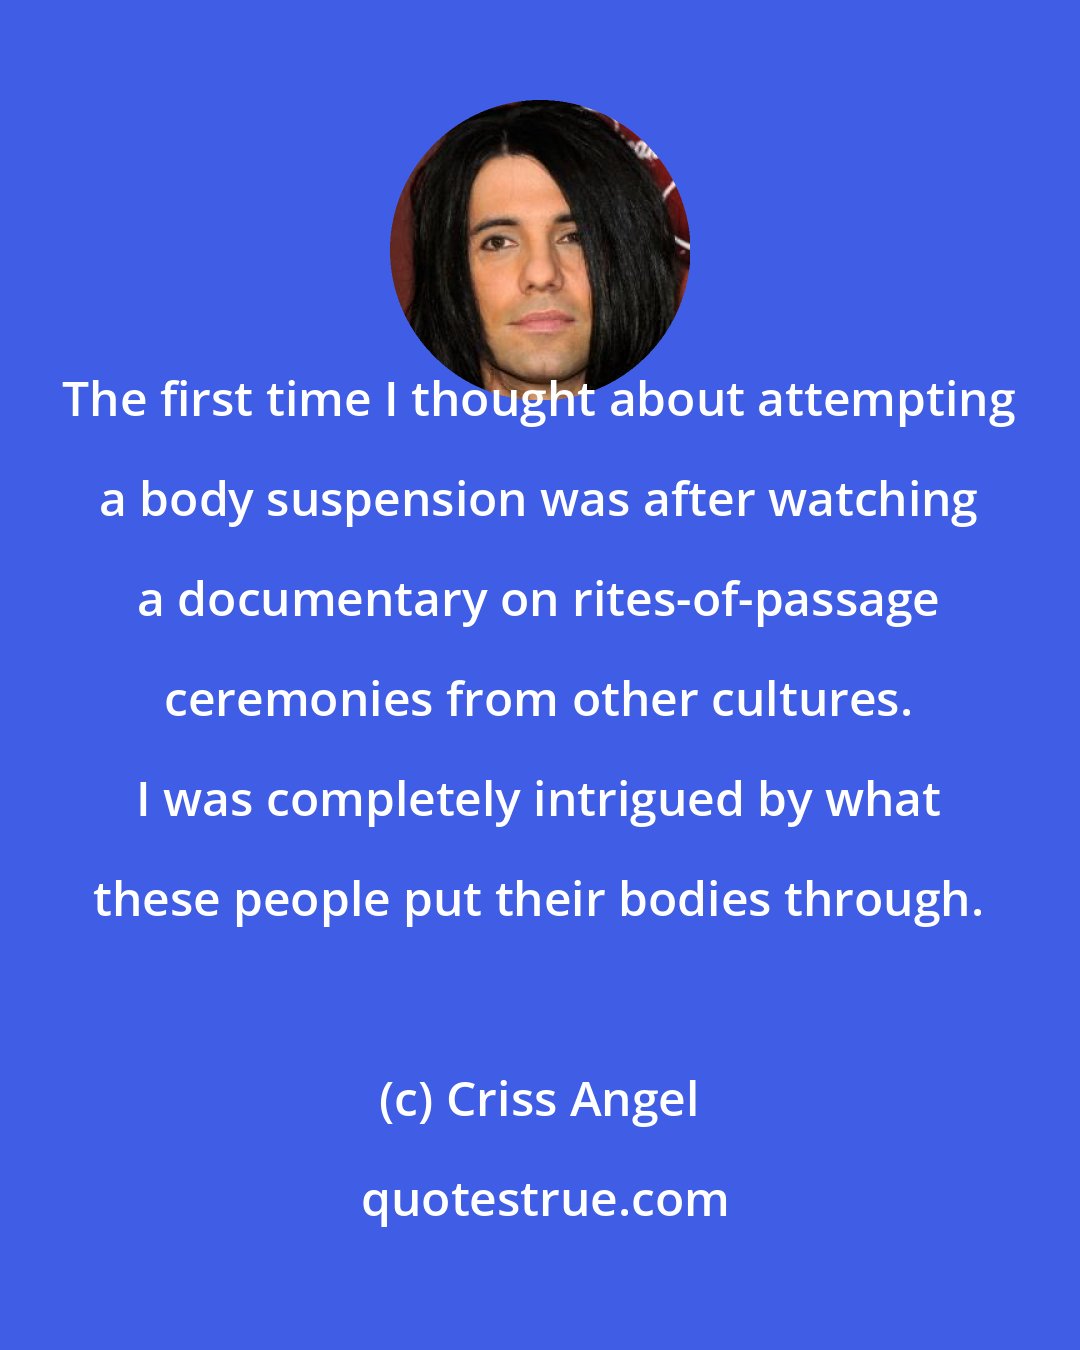 Criss Angel: The first time I thought about attempting a body suspension was after watching a documentary on rites-of-passage ceremonies from other cultures. I was completely intrigued by what these people put their bodies through.